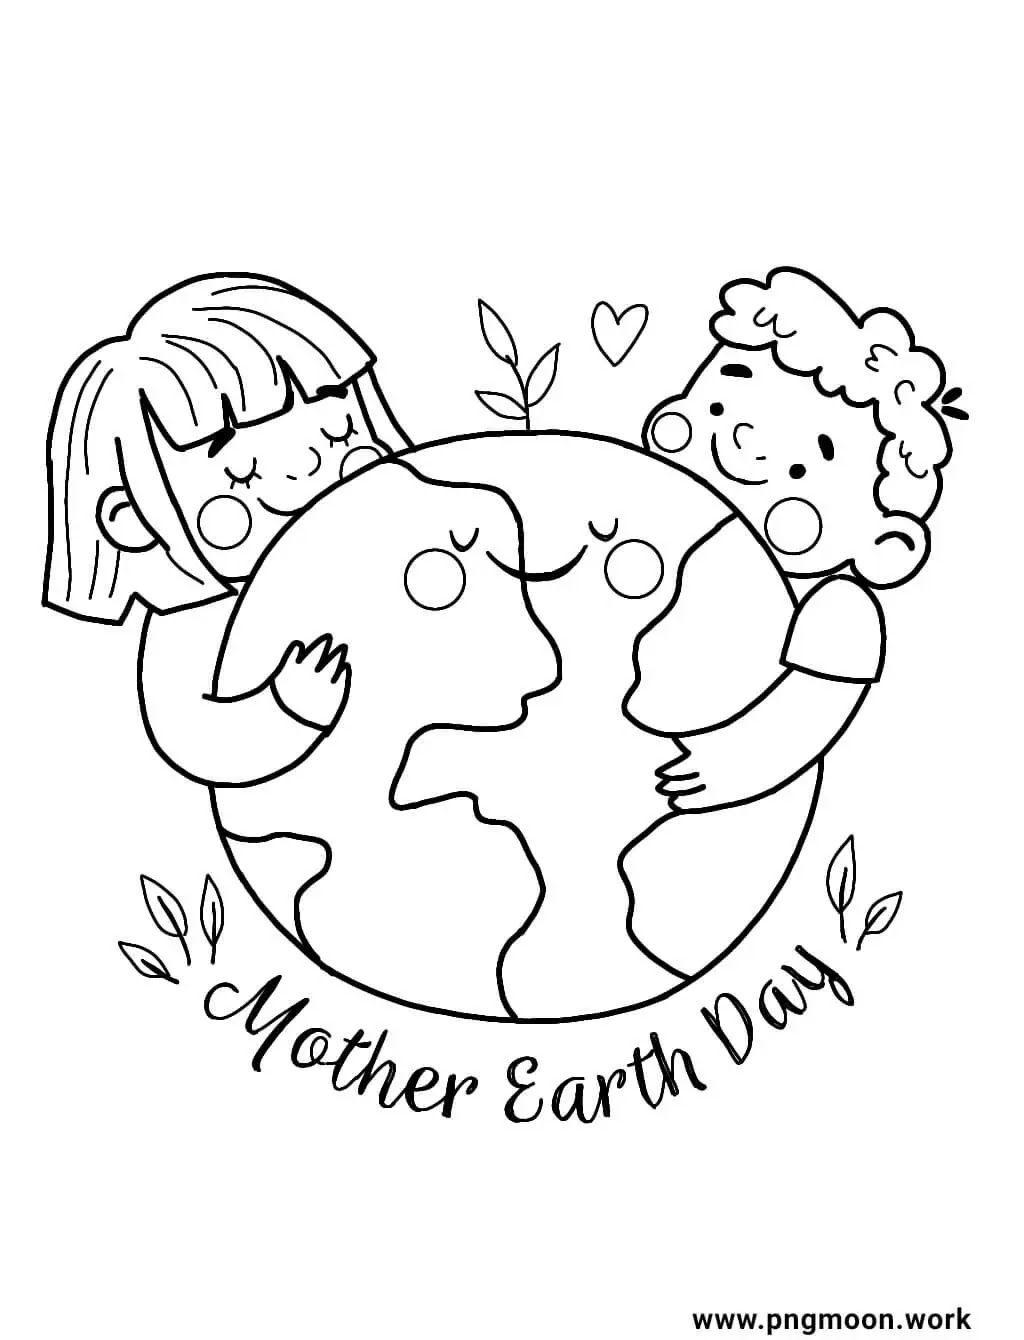 mother earth day coloring page